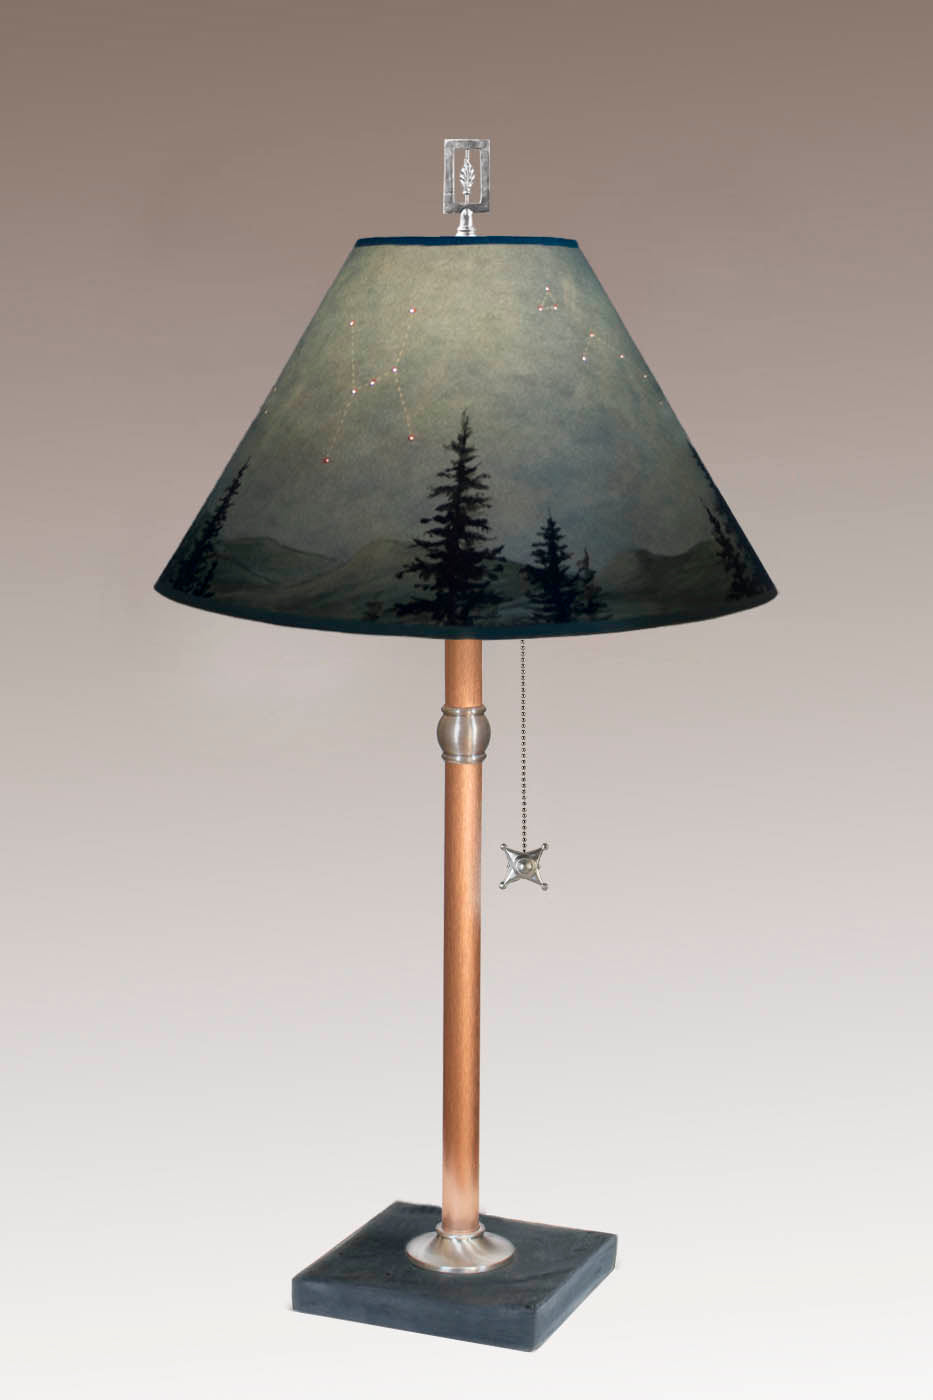 Copper Table Lamp with Medium Conical Shade in Midnight Sky